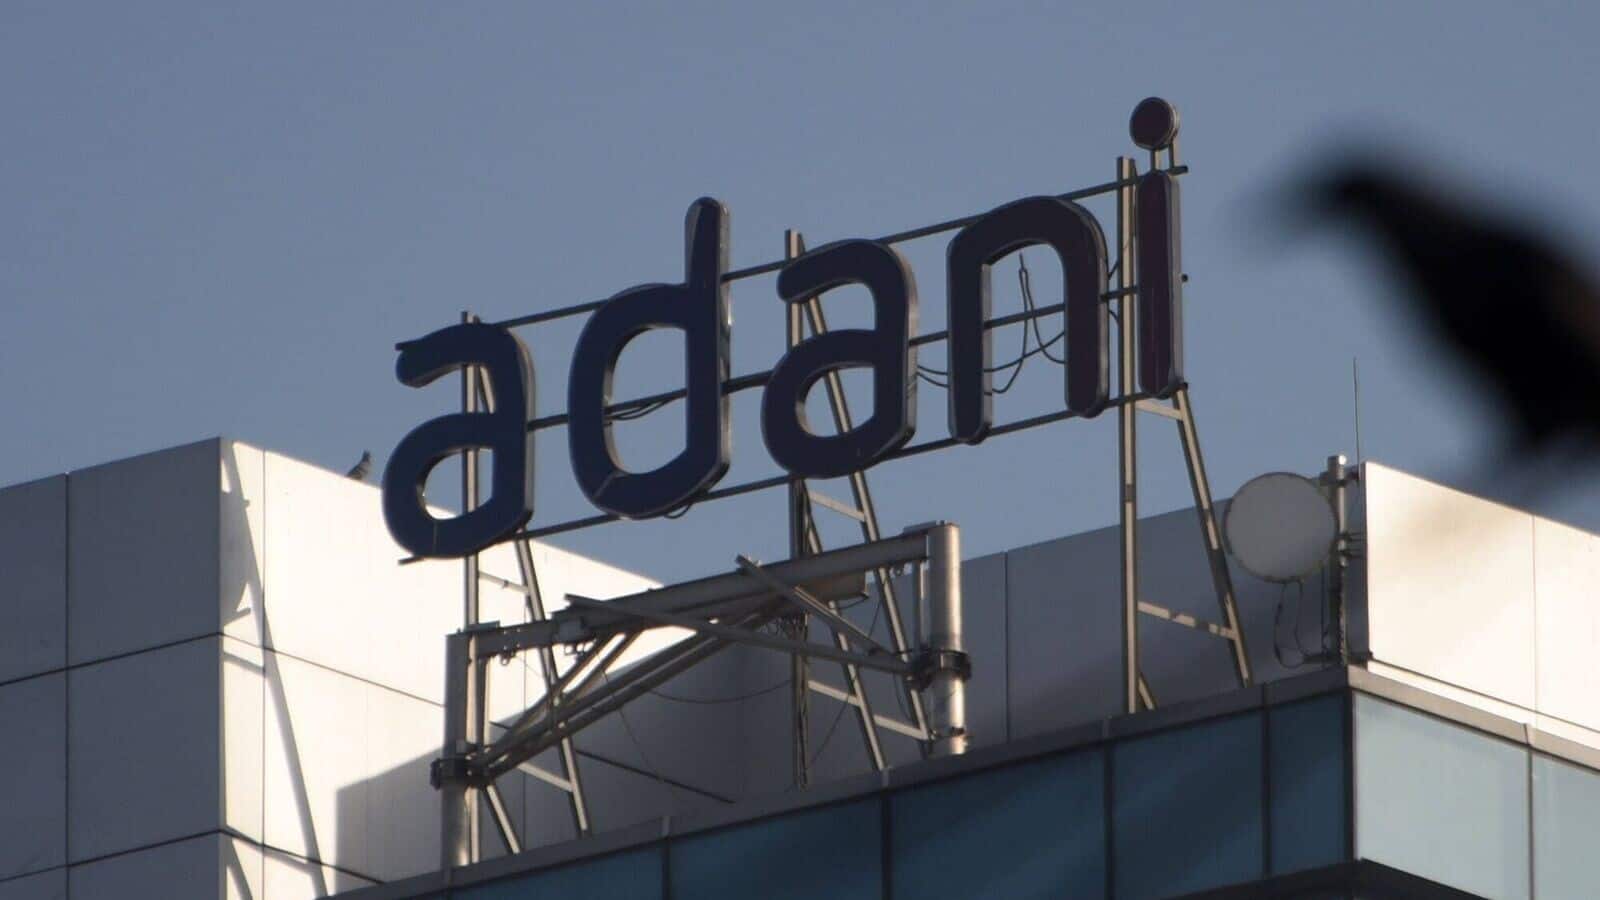 SEBI issues show-cause notice to Hindenburg Research in Adani case